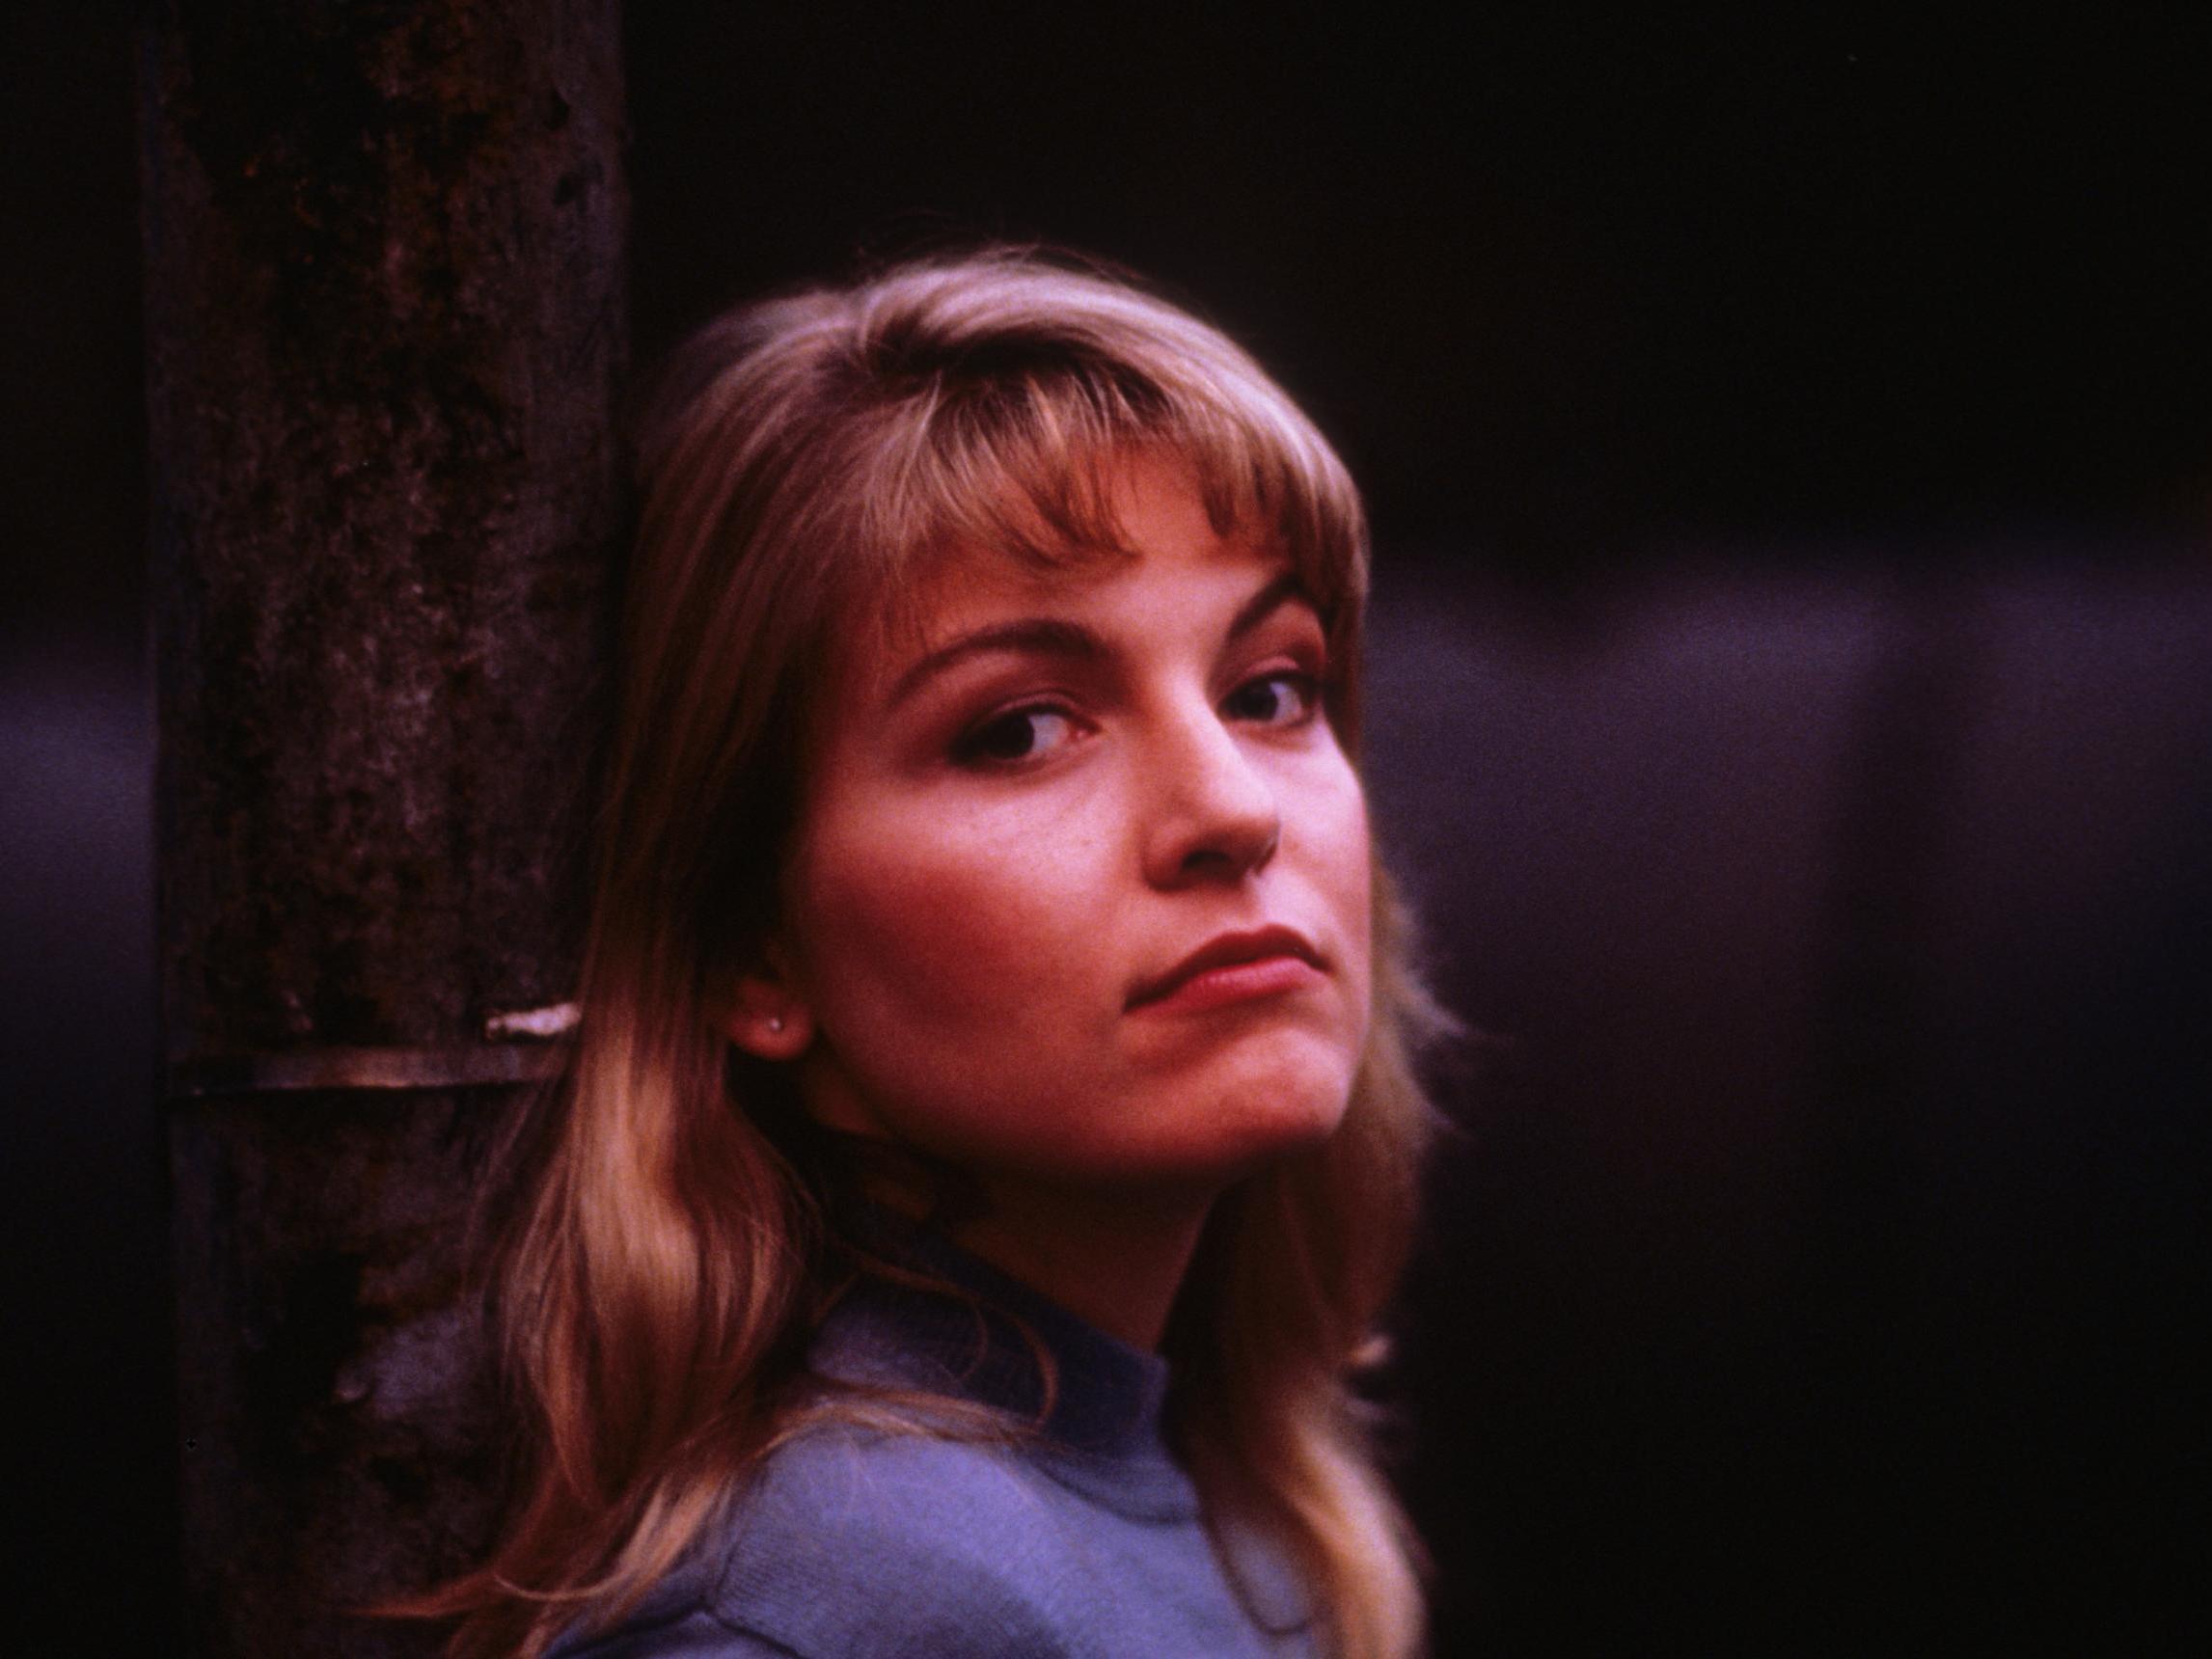 Sheryl Lee played two roles on the series, including that of murder victim Laura Palmer